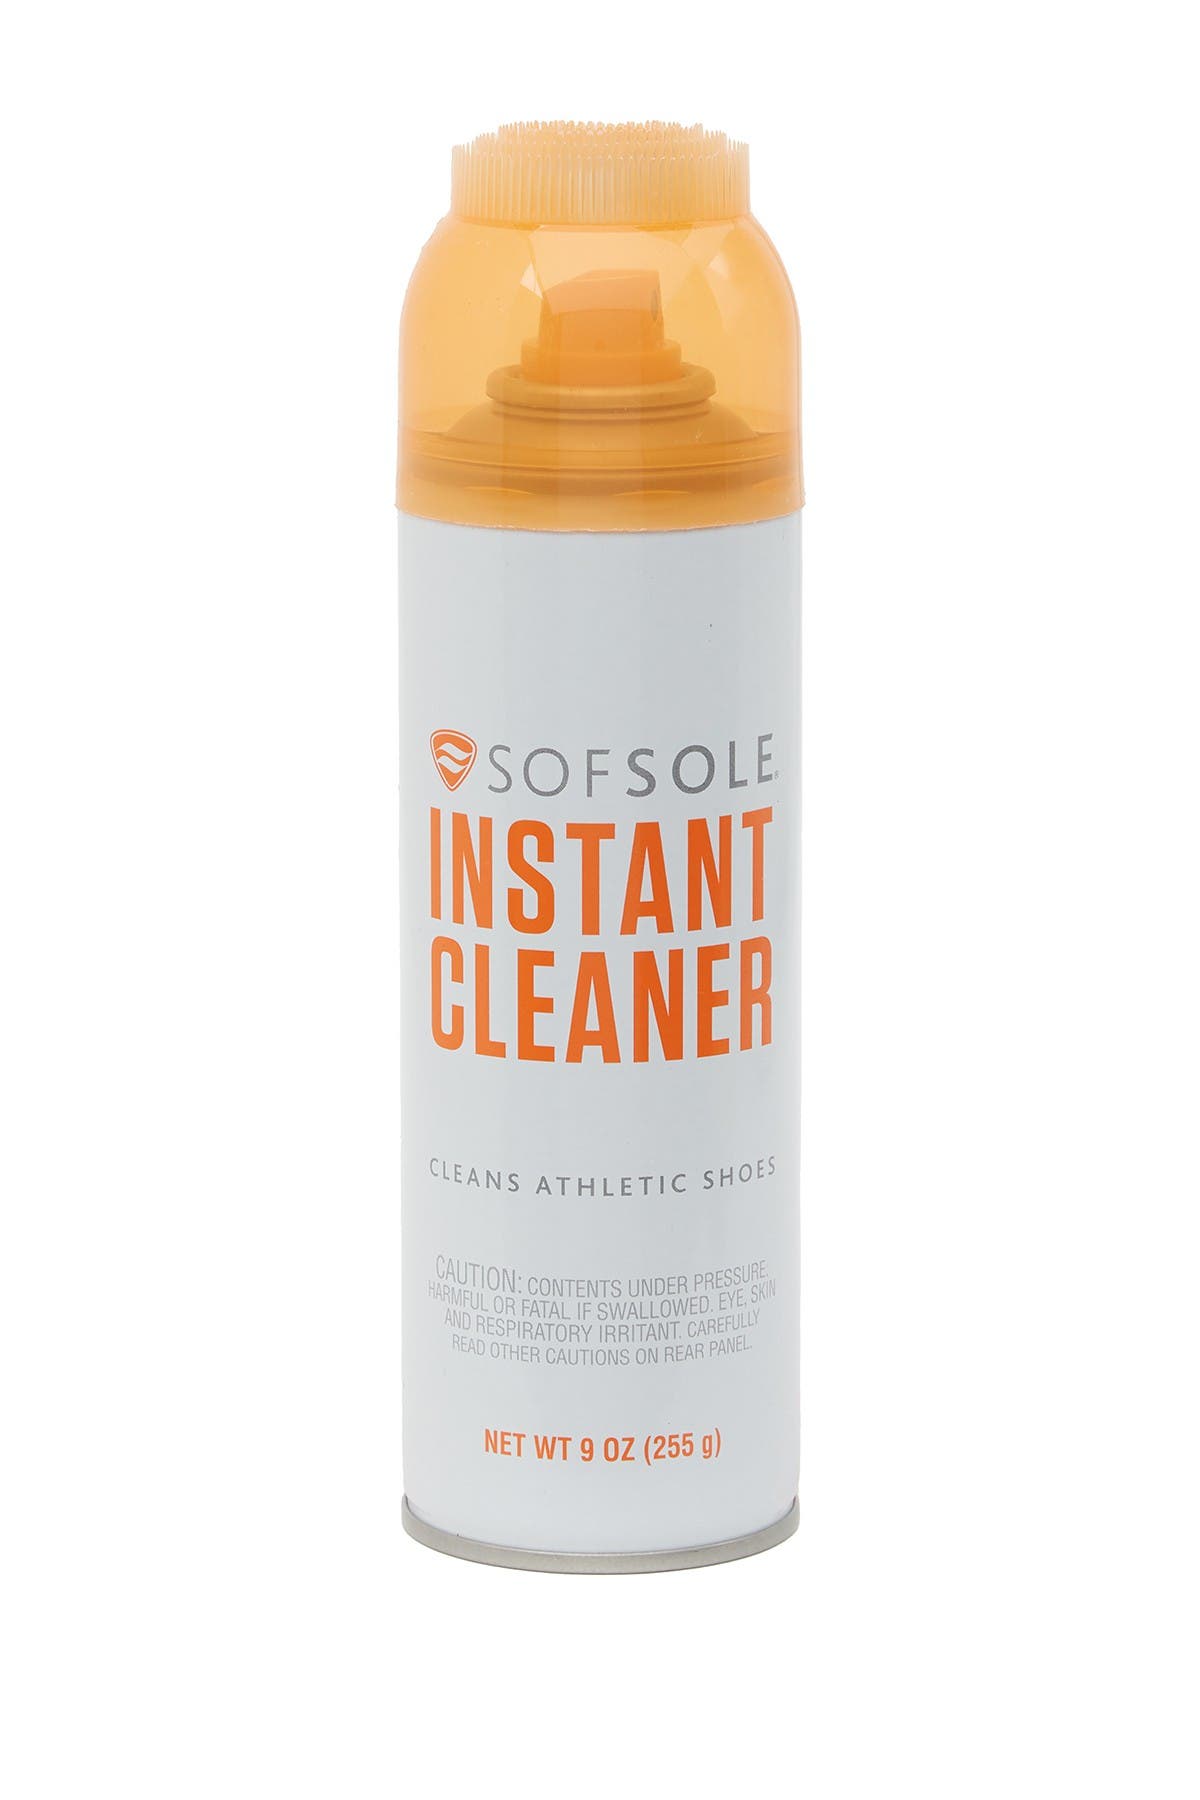 sof sole cleaner